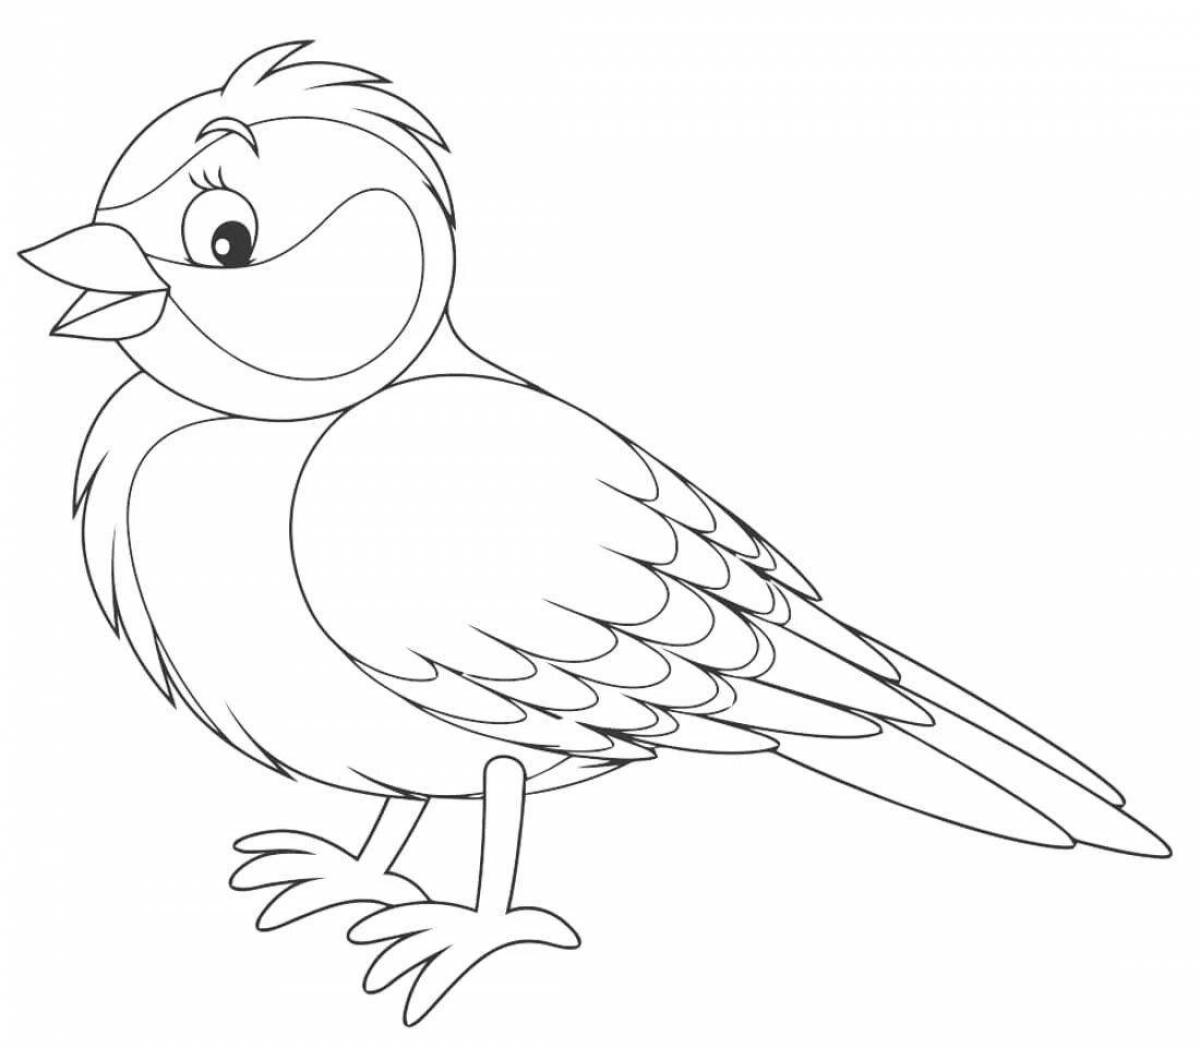 Vibrant bird coloring pages for kids